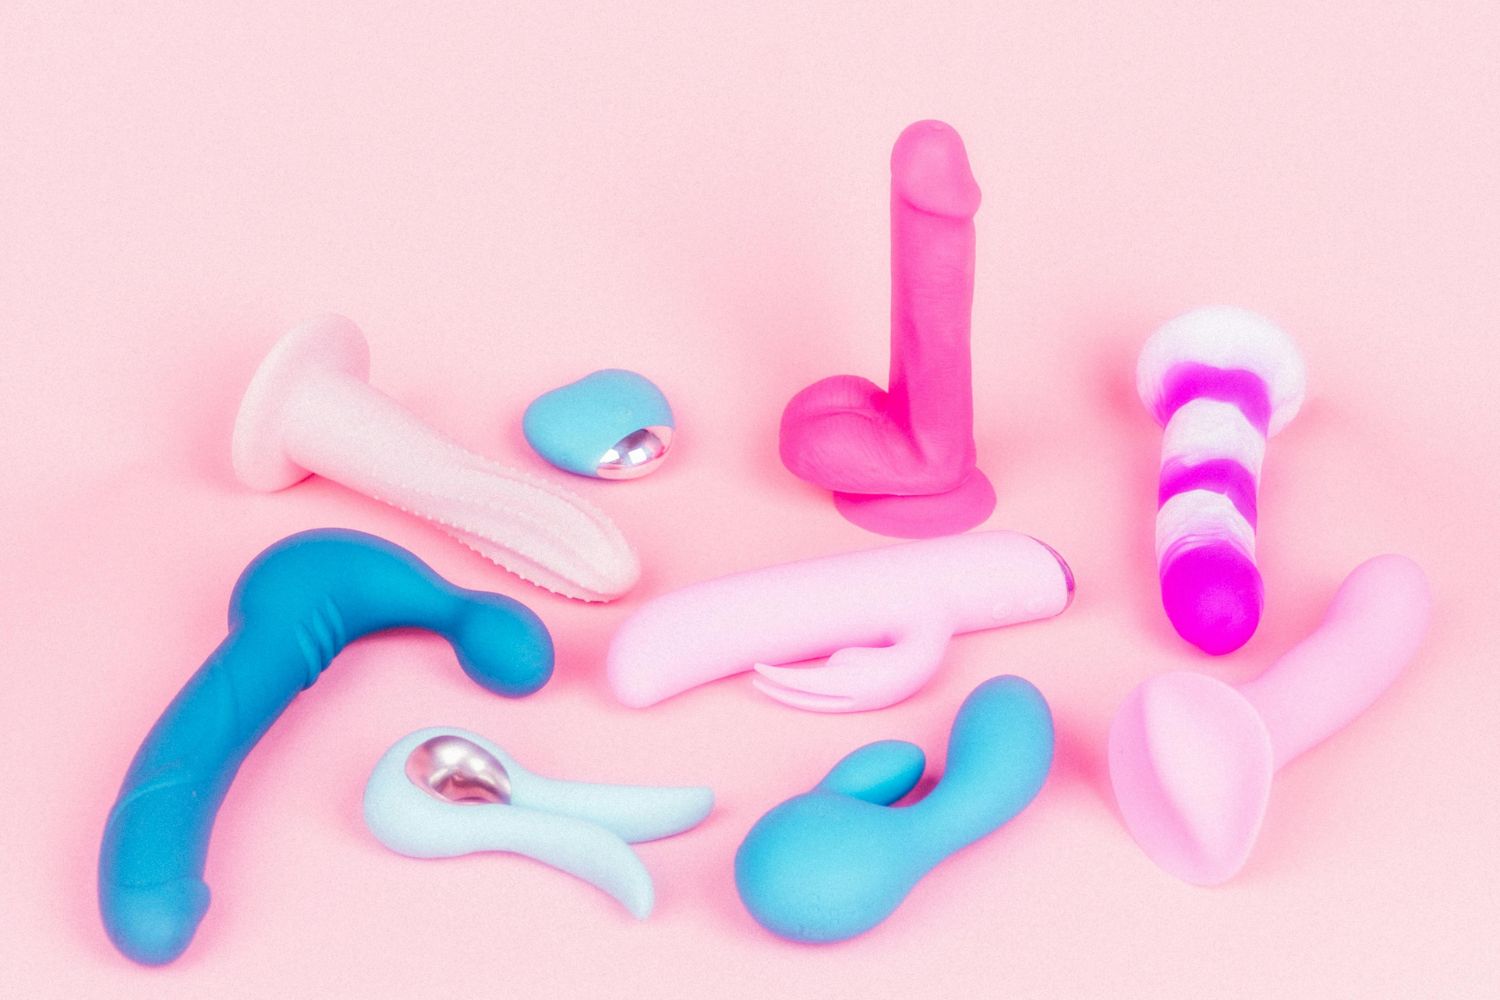 A set of beginner dildos in different shapes, colors, and textures.